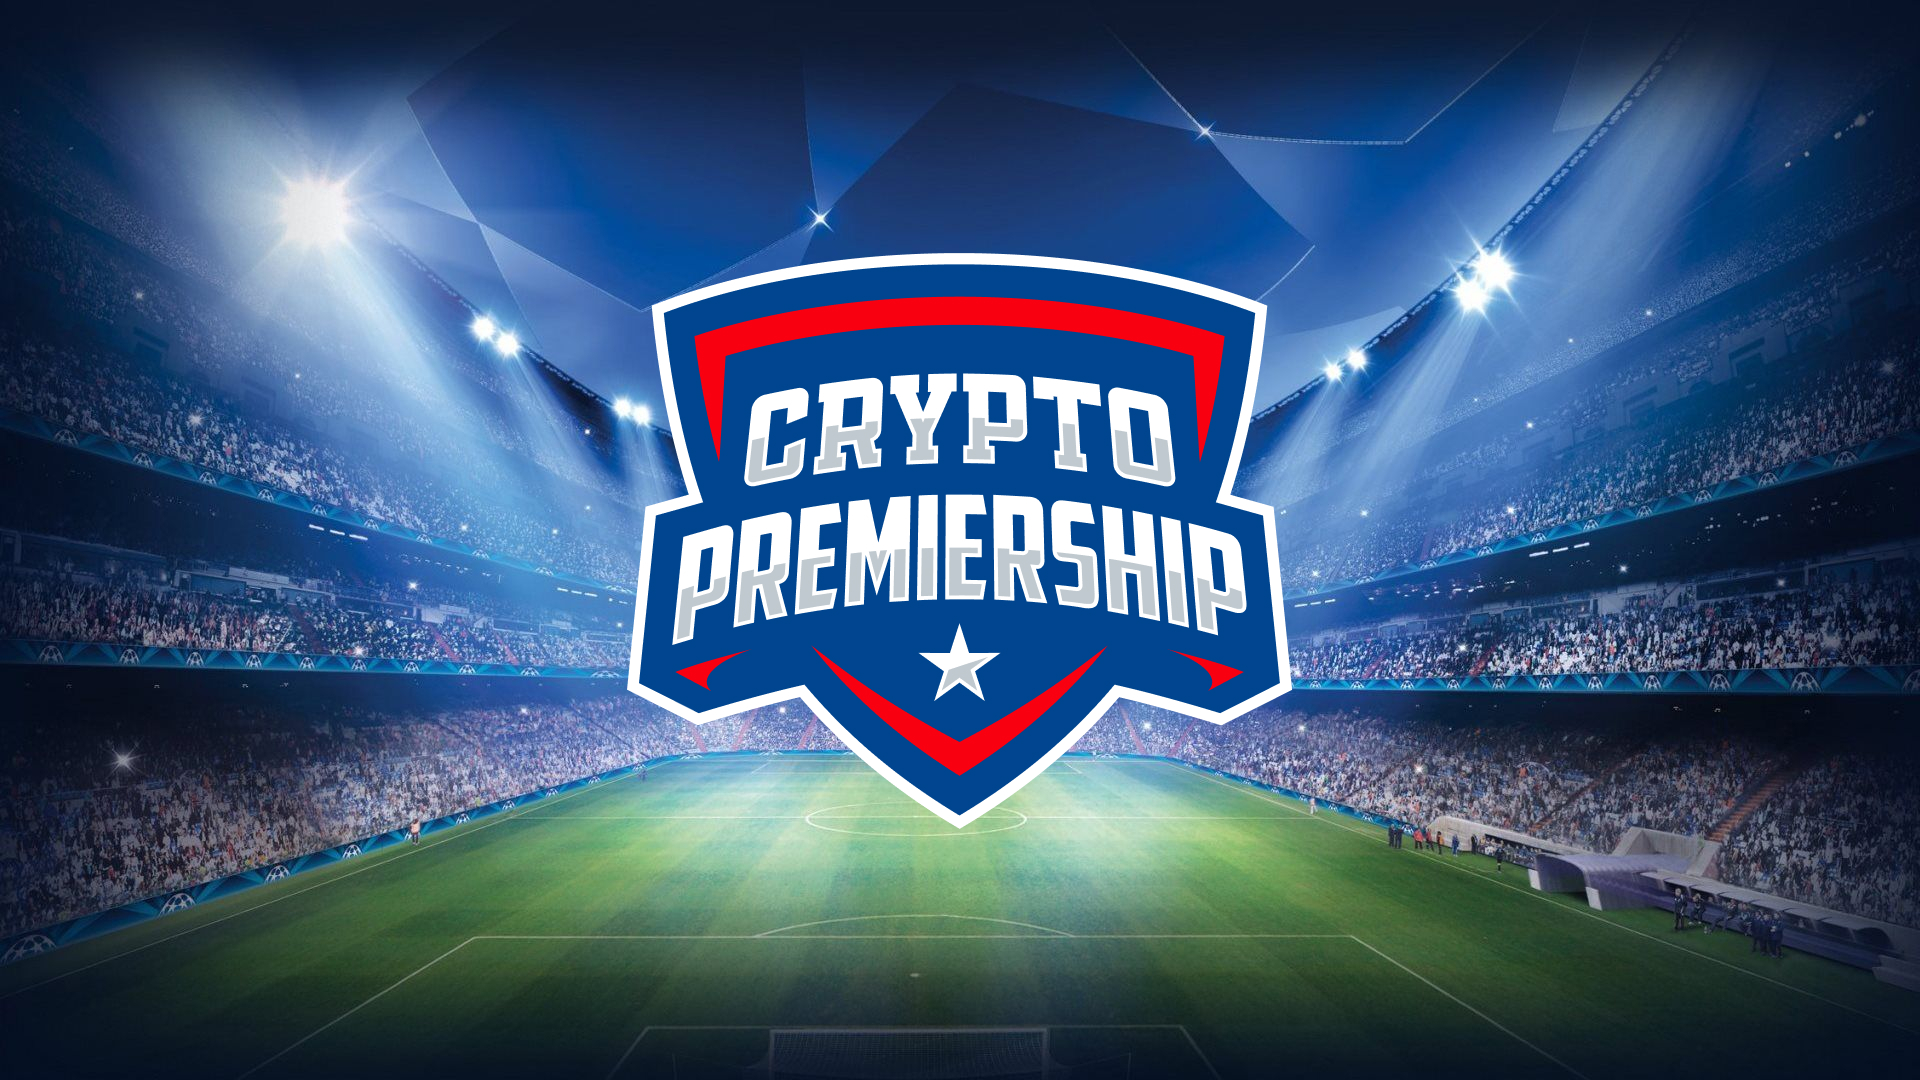 Lady Eagles v Storm Mustangs - Crypto Premiership 2022, Online Event